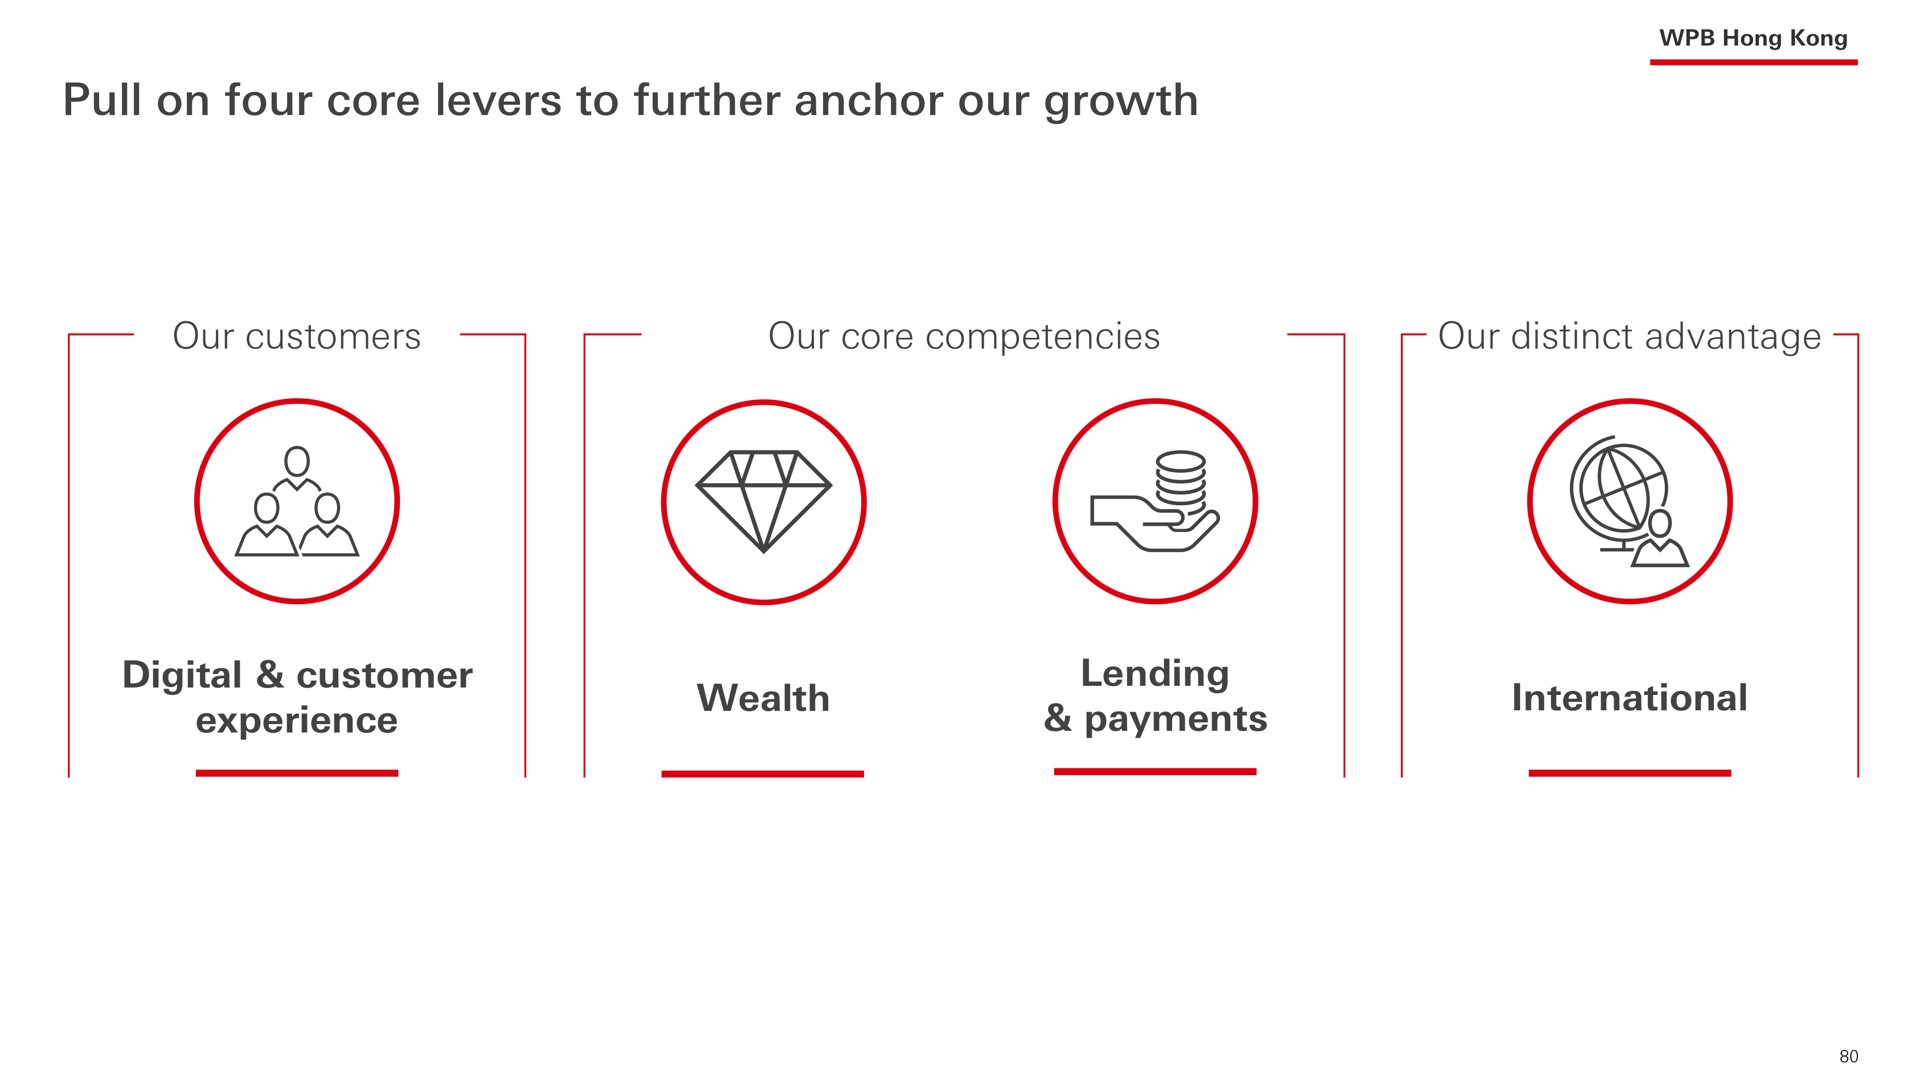 pull on four core levers to further anchor our growth | HSBC